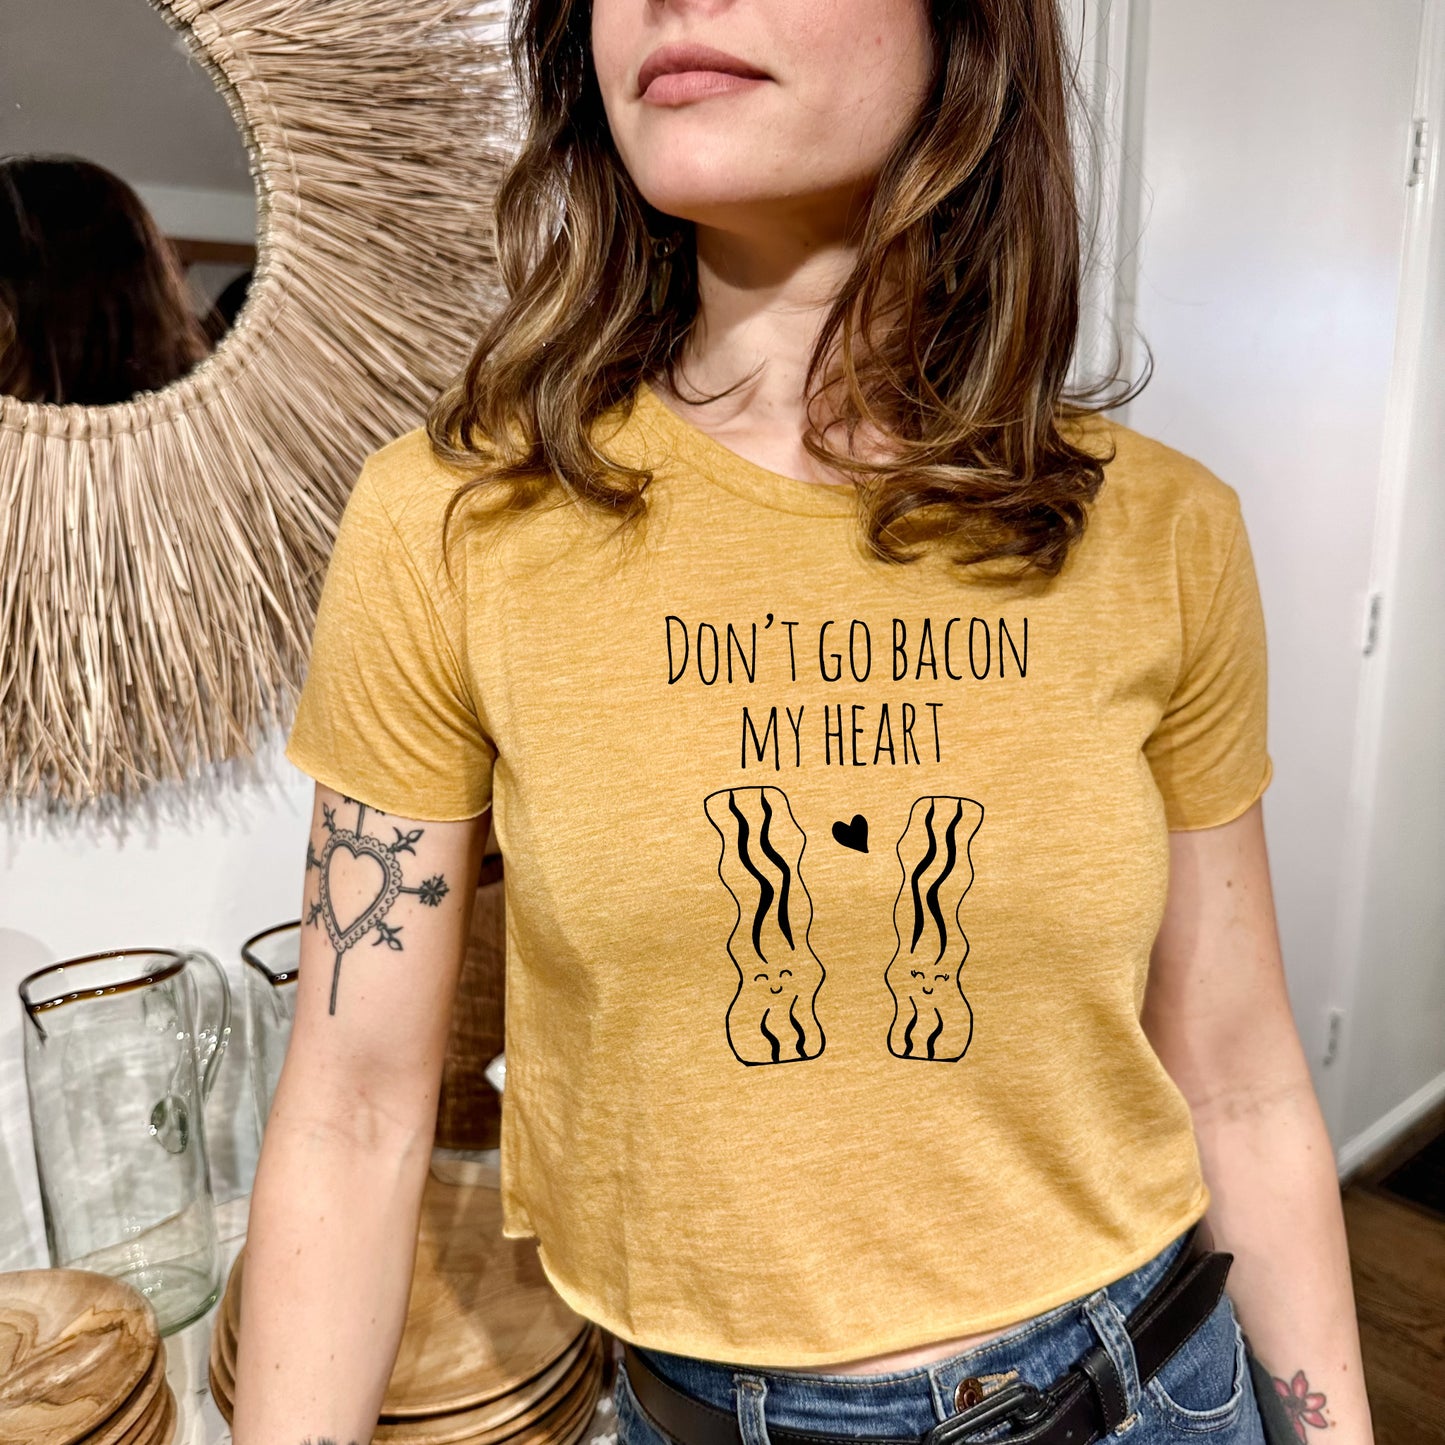 Don't Go Bacon My Heart - Women's Crop Tee - Heather Gray or Gold